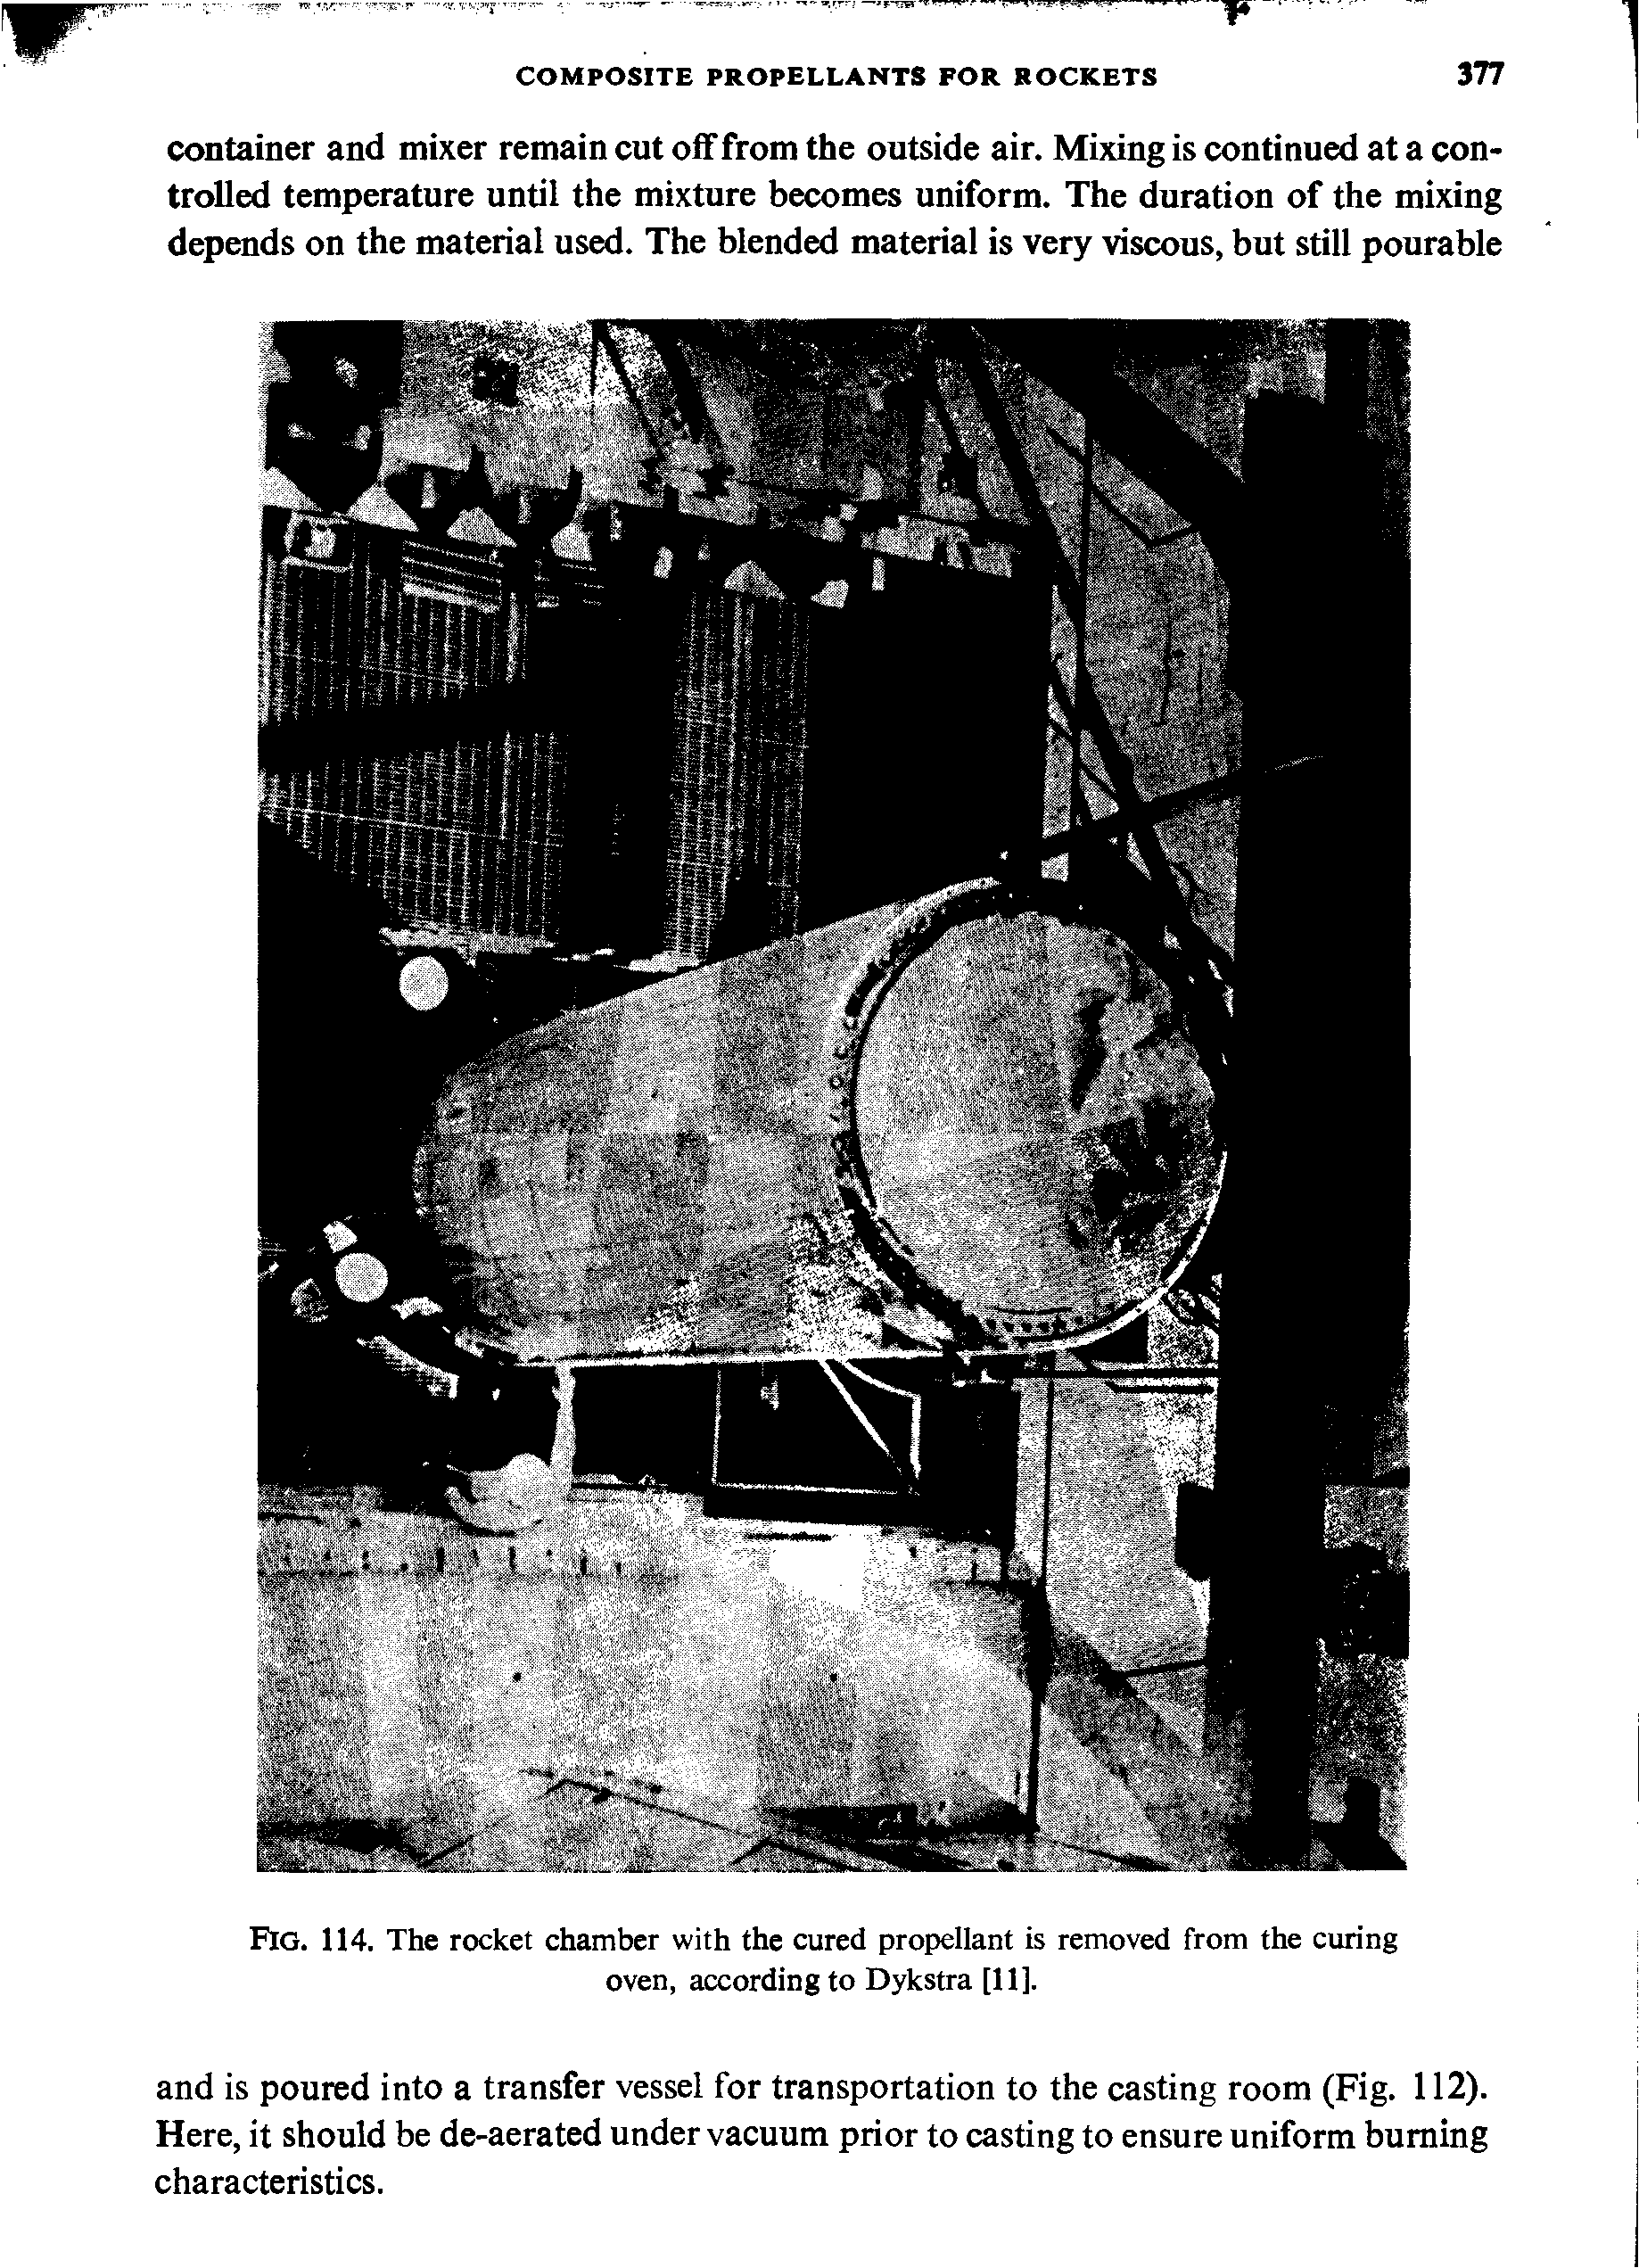 Fig. 114. The rocket chamber with the cured propellant is removed from the curing oven, according to Dykstra [11].